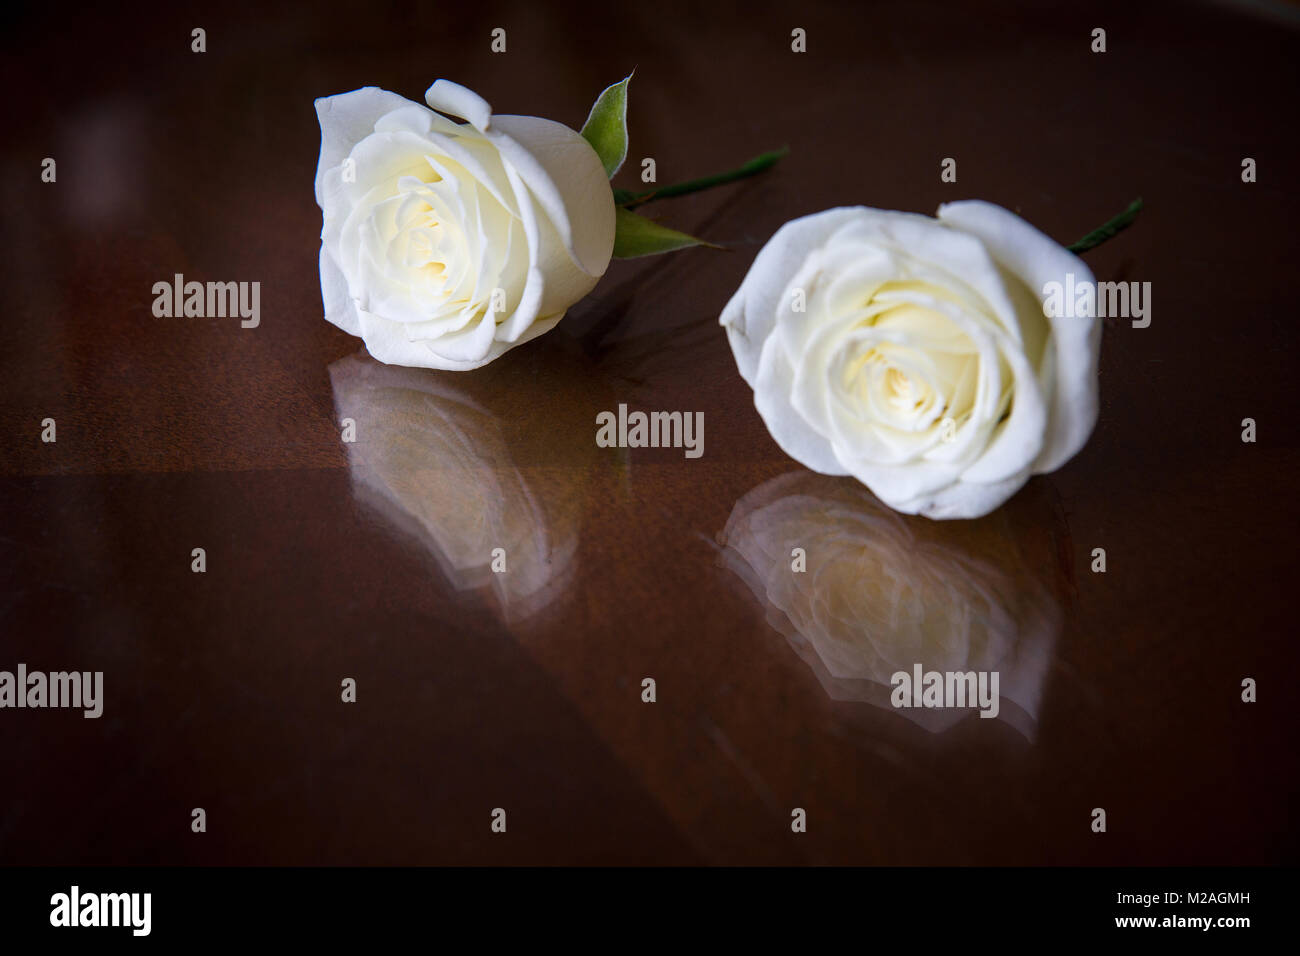 Two white roses on wooden table Stock Photo